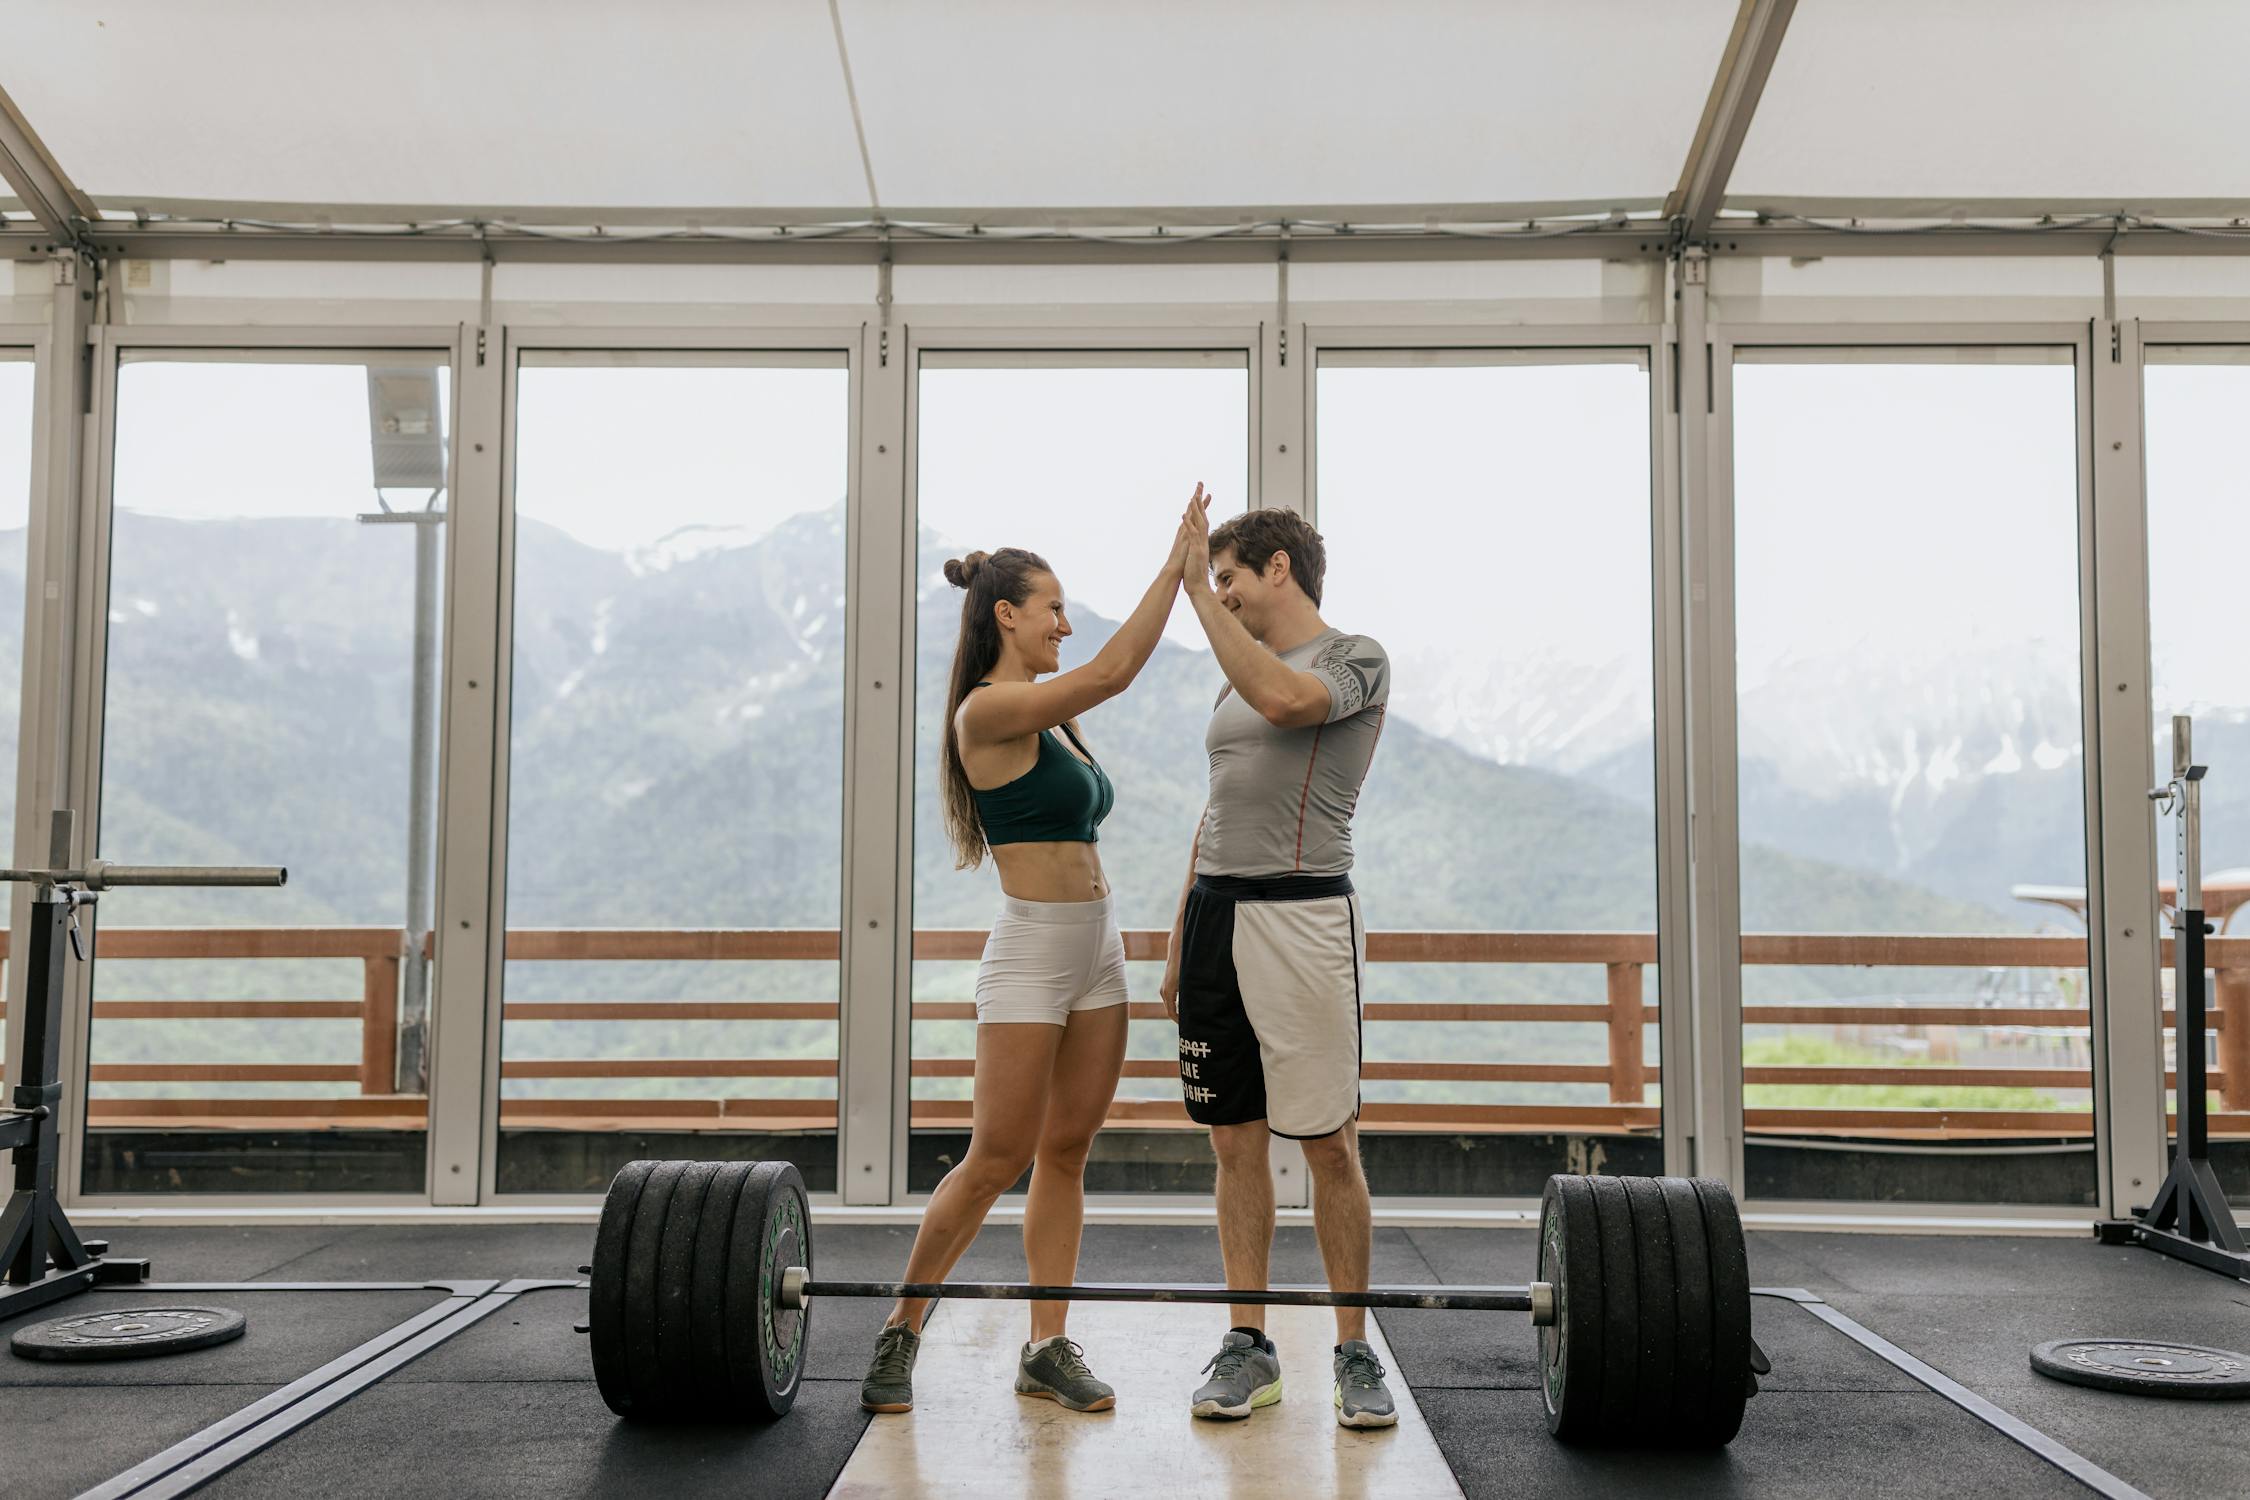 What are some ways to keep a workout partner motivated?